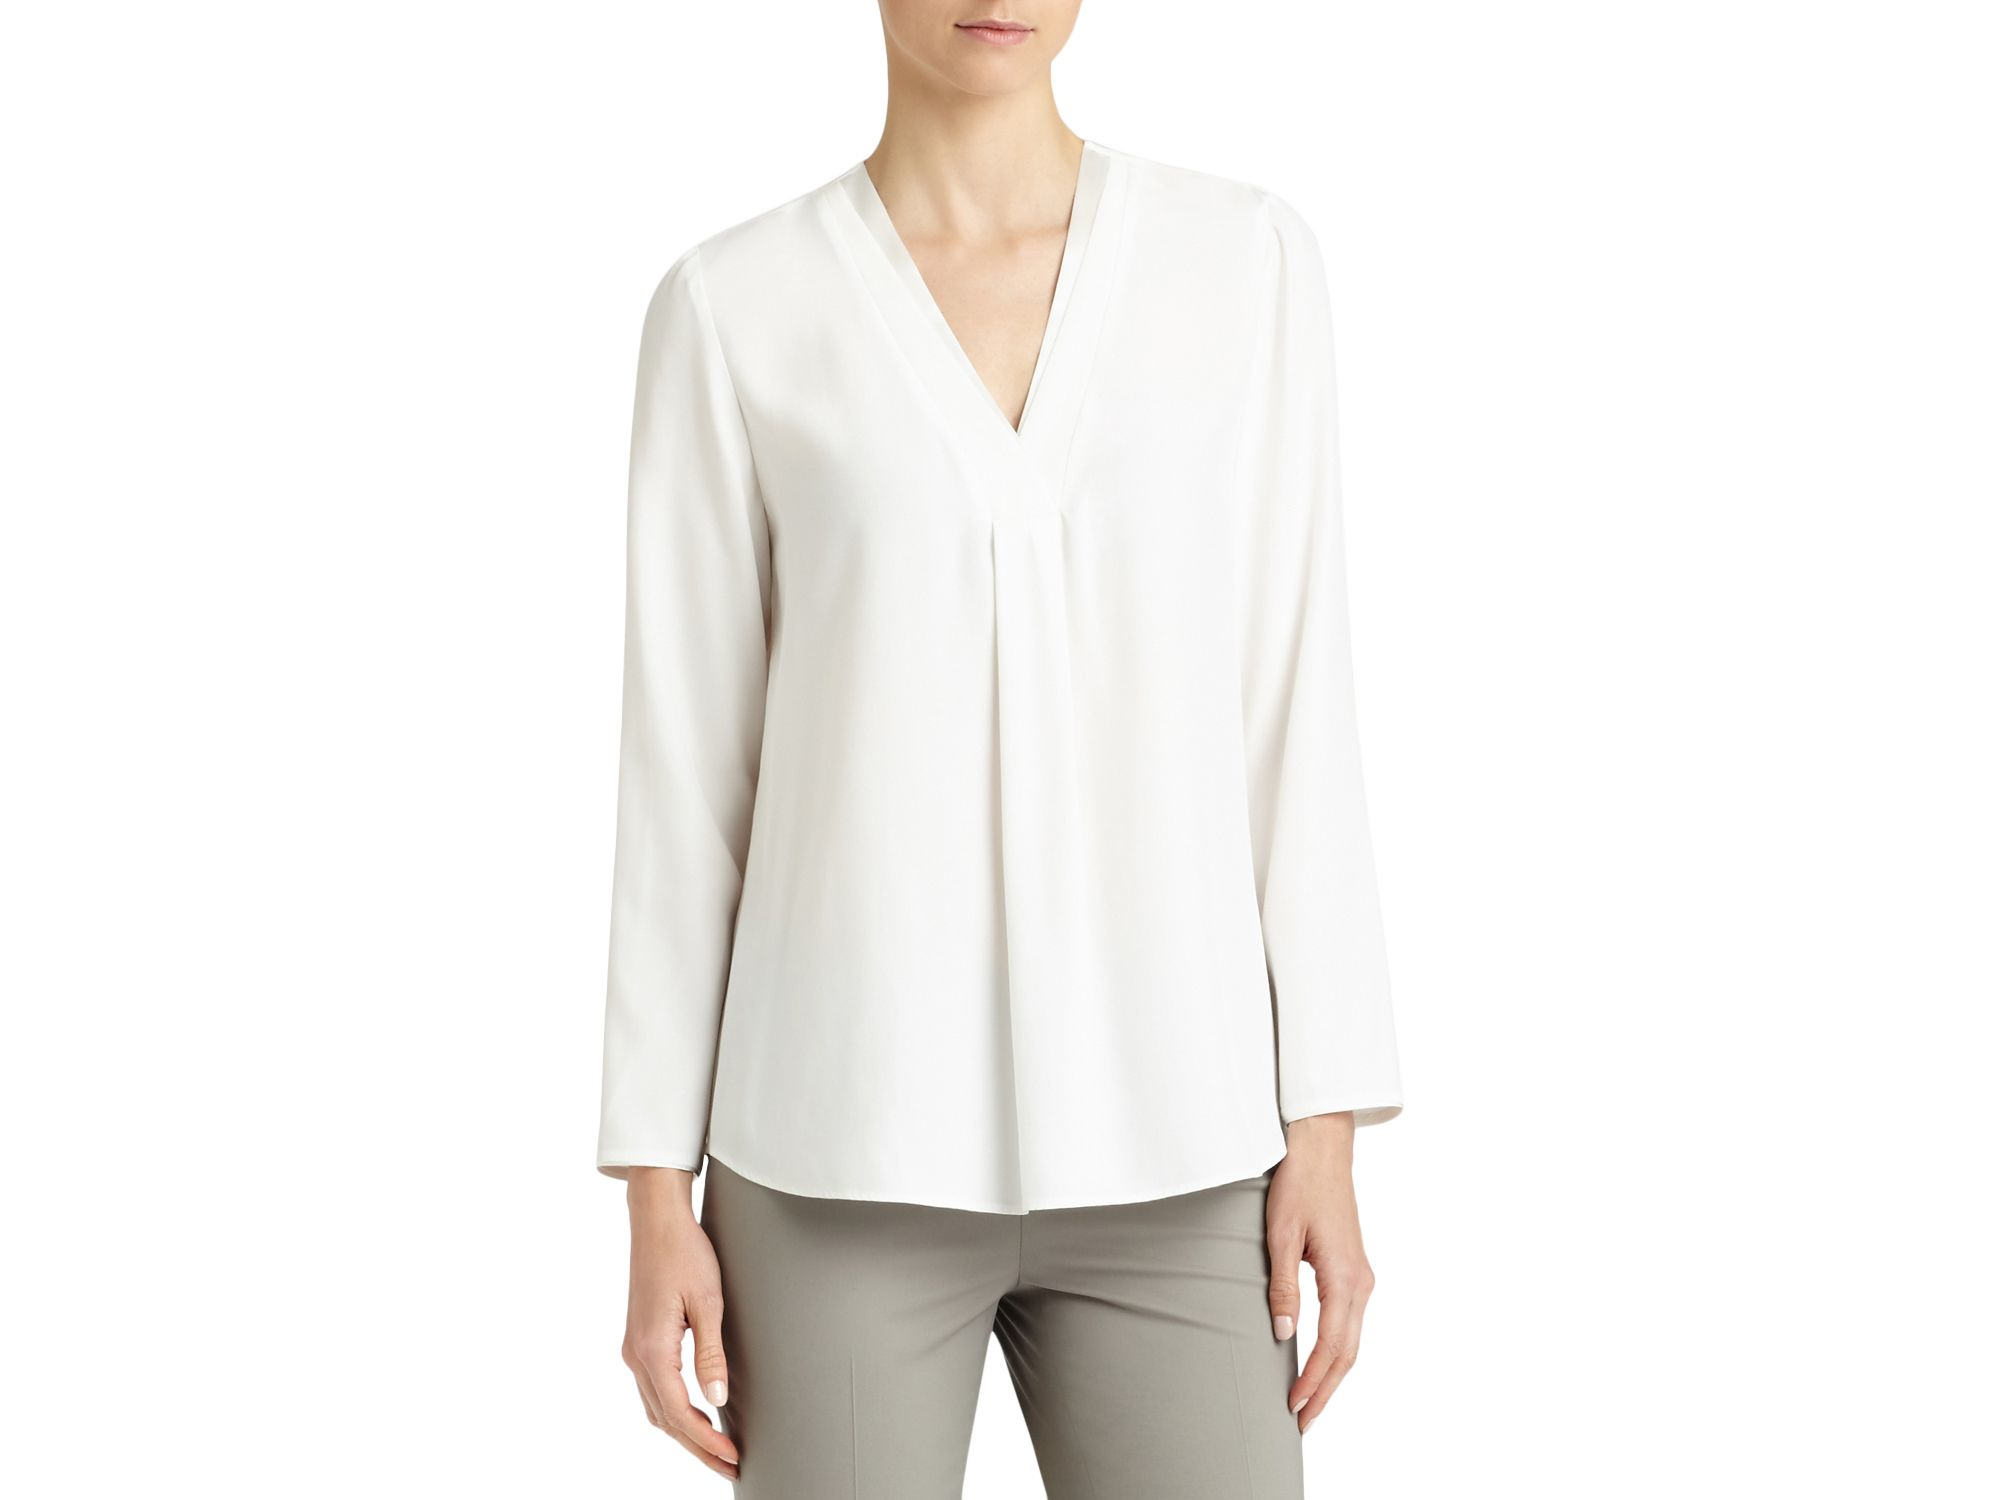 Lyst - Lafayette 148 New York Libby Pleat Front Silk Blouse in White